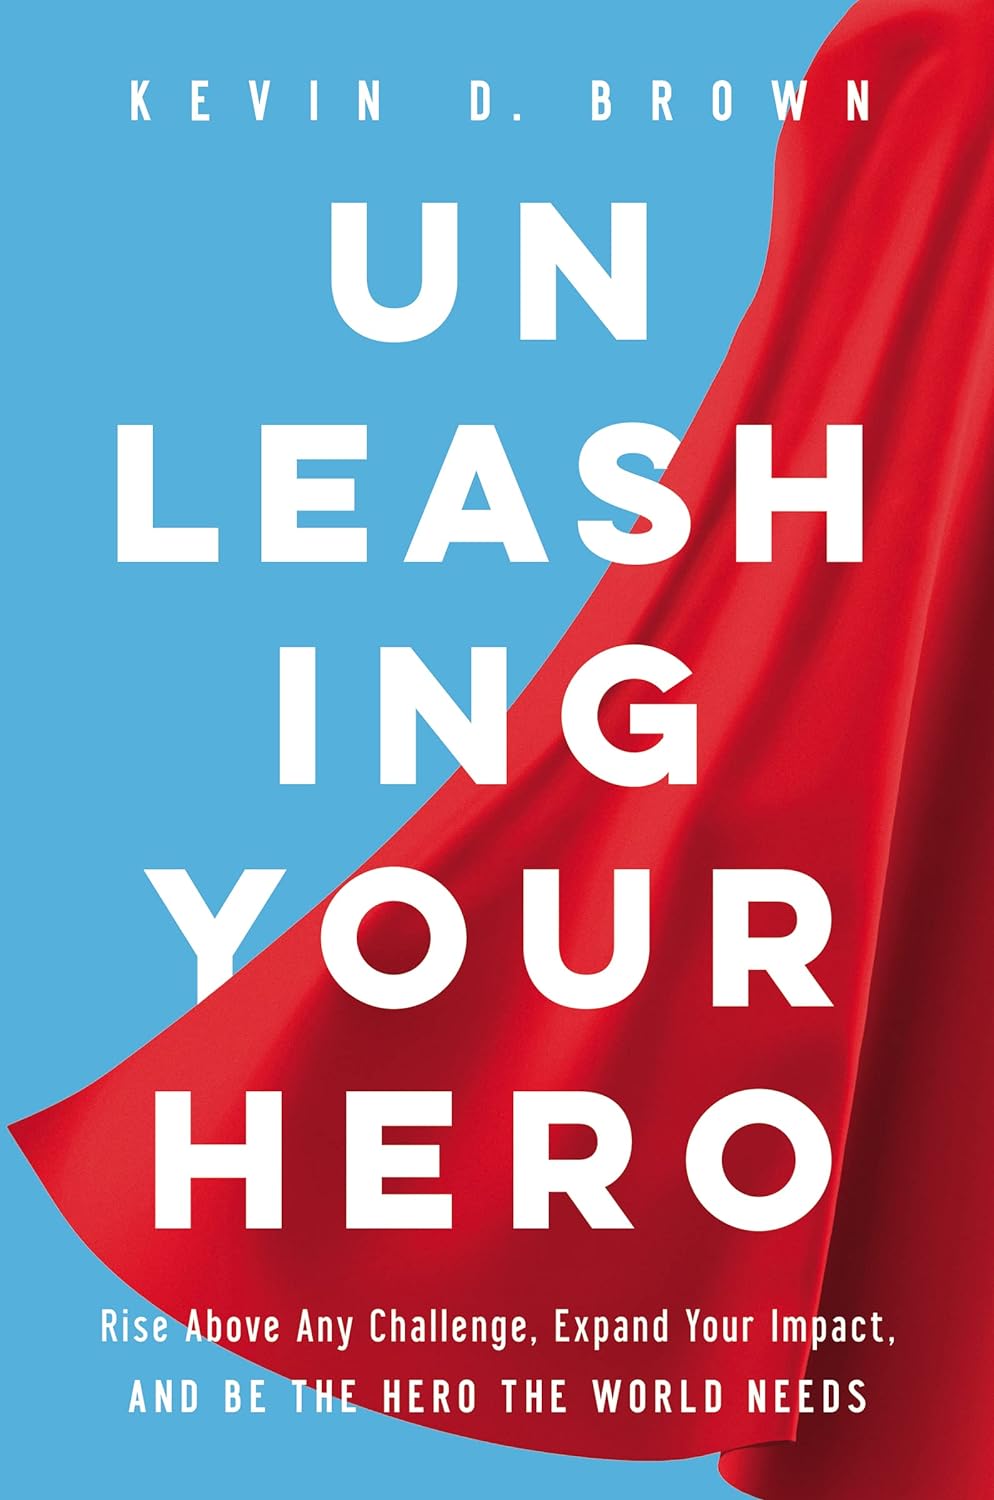 Kevin D. Brown - Unleashing Your Hero, Rise Above Any Challenge, Expand Your Impact, and Be the Hero the World Needs